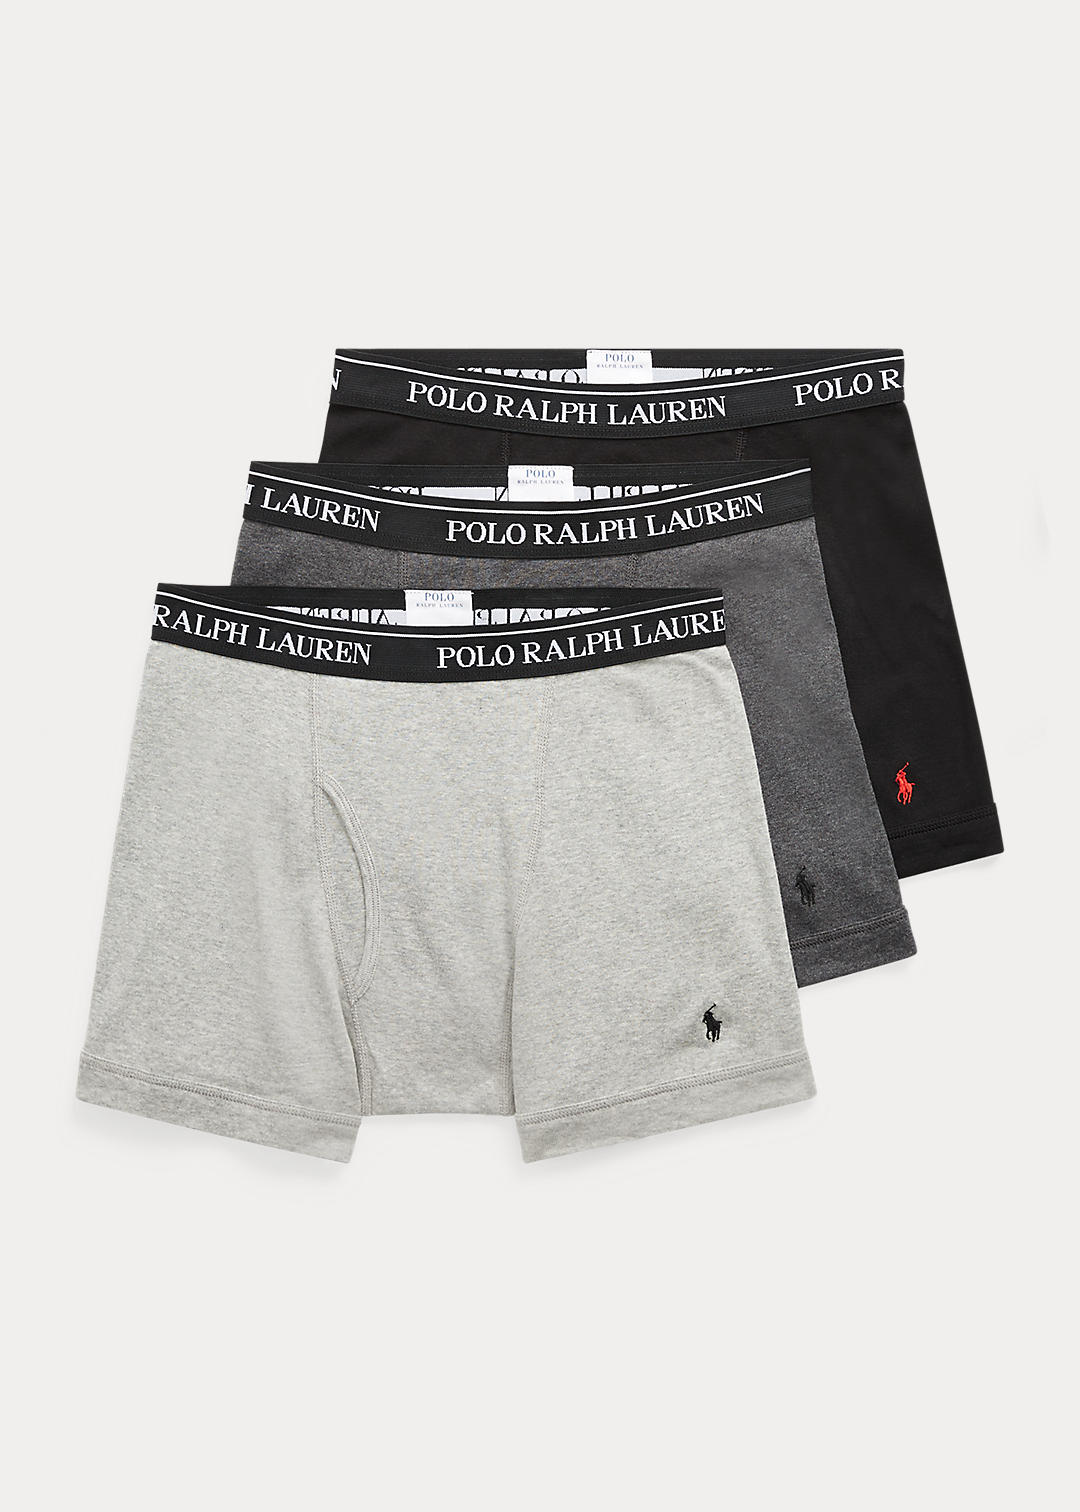 Black Bear Boys Active Performance Boxer Brief and T-Shirt Matching Set 4 Pack